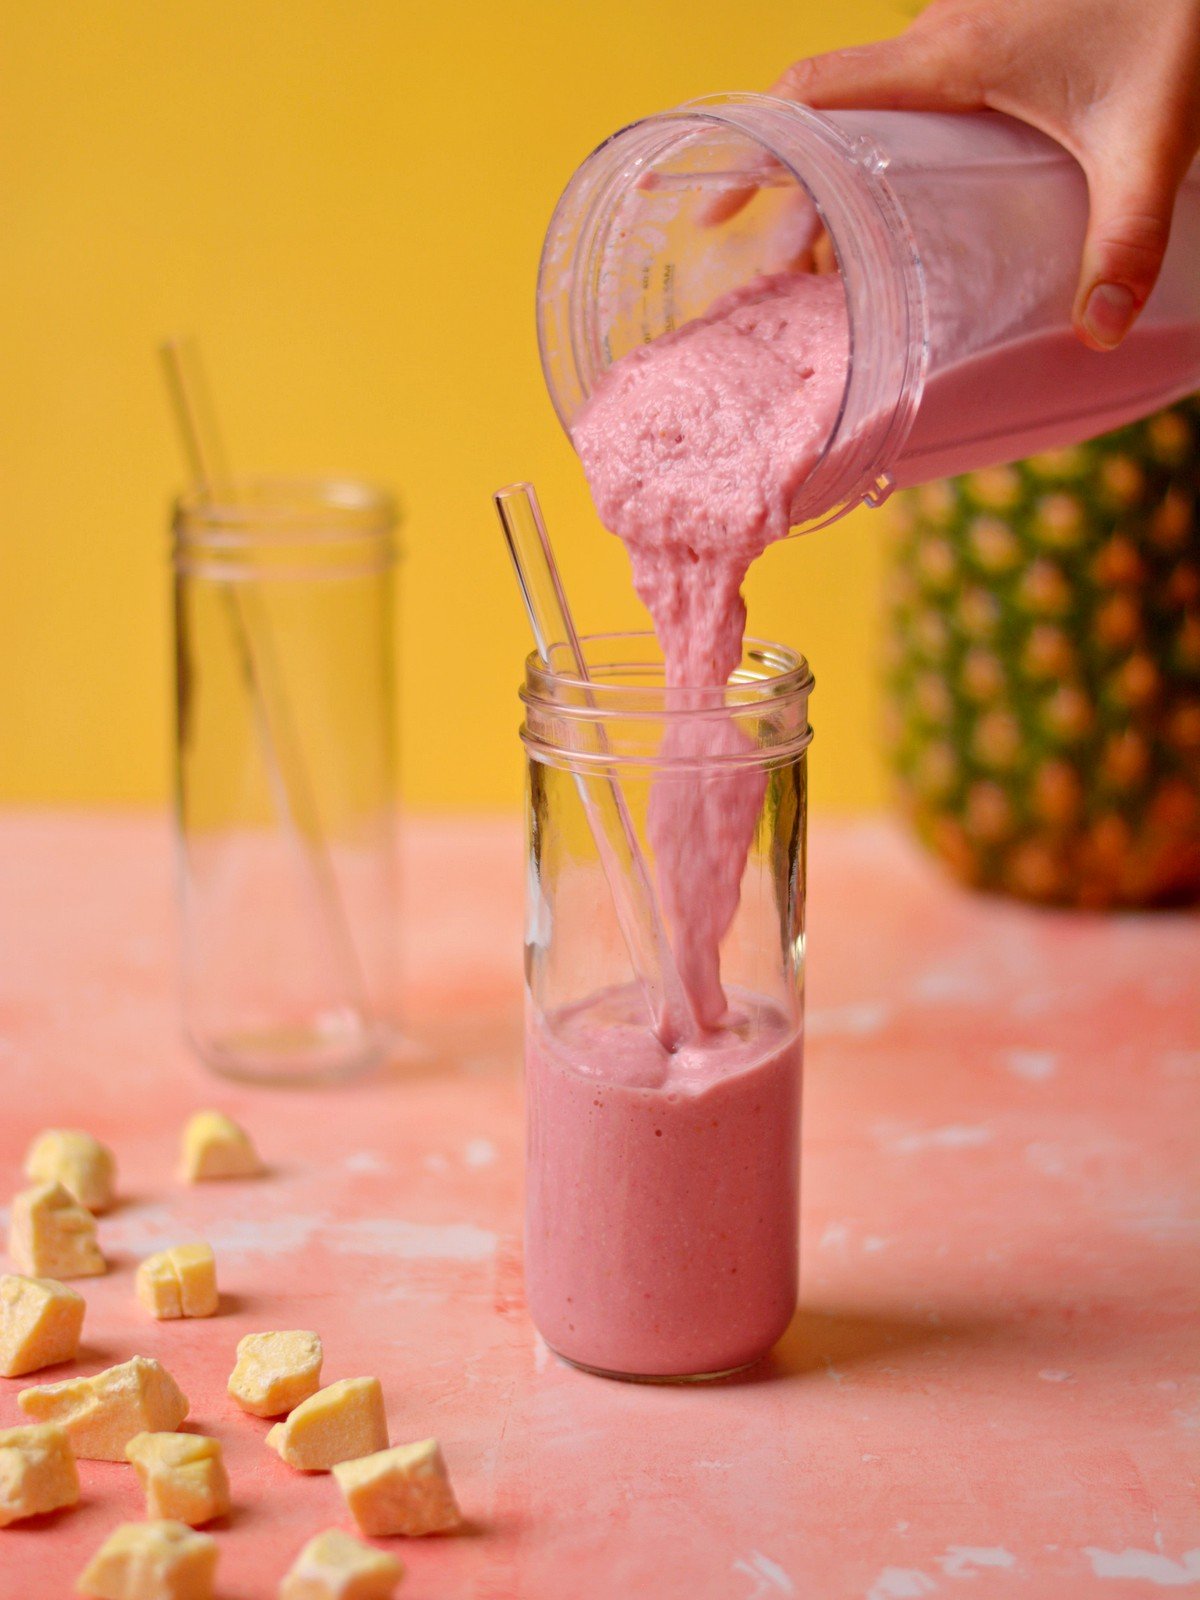 Pouring a pink colored smoothie into a glass with a straw.